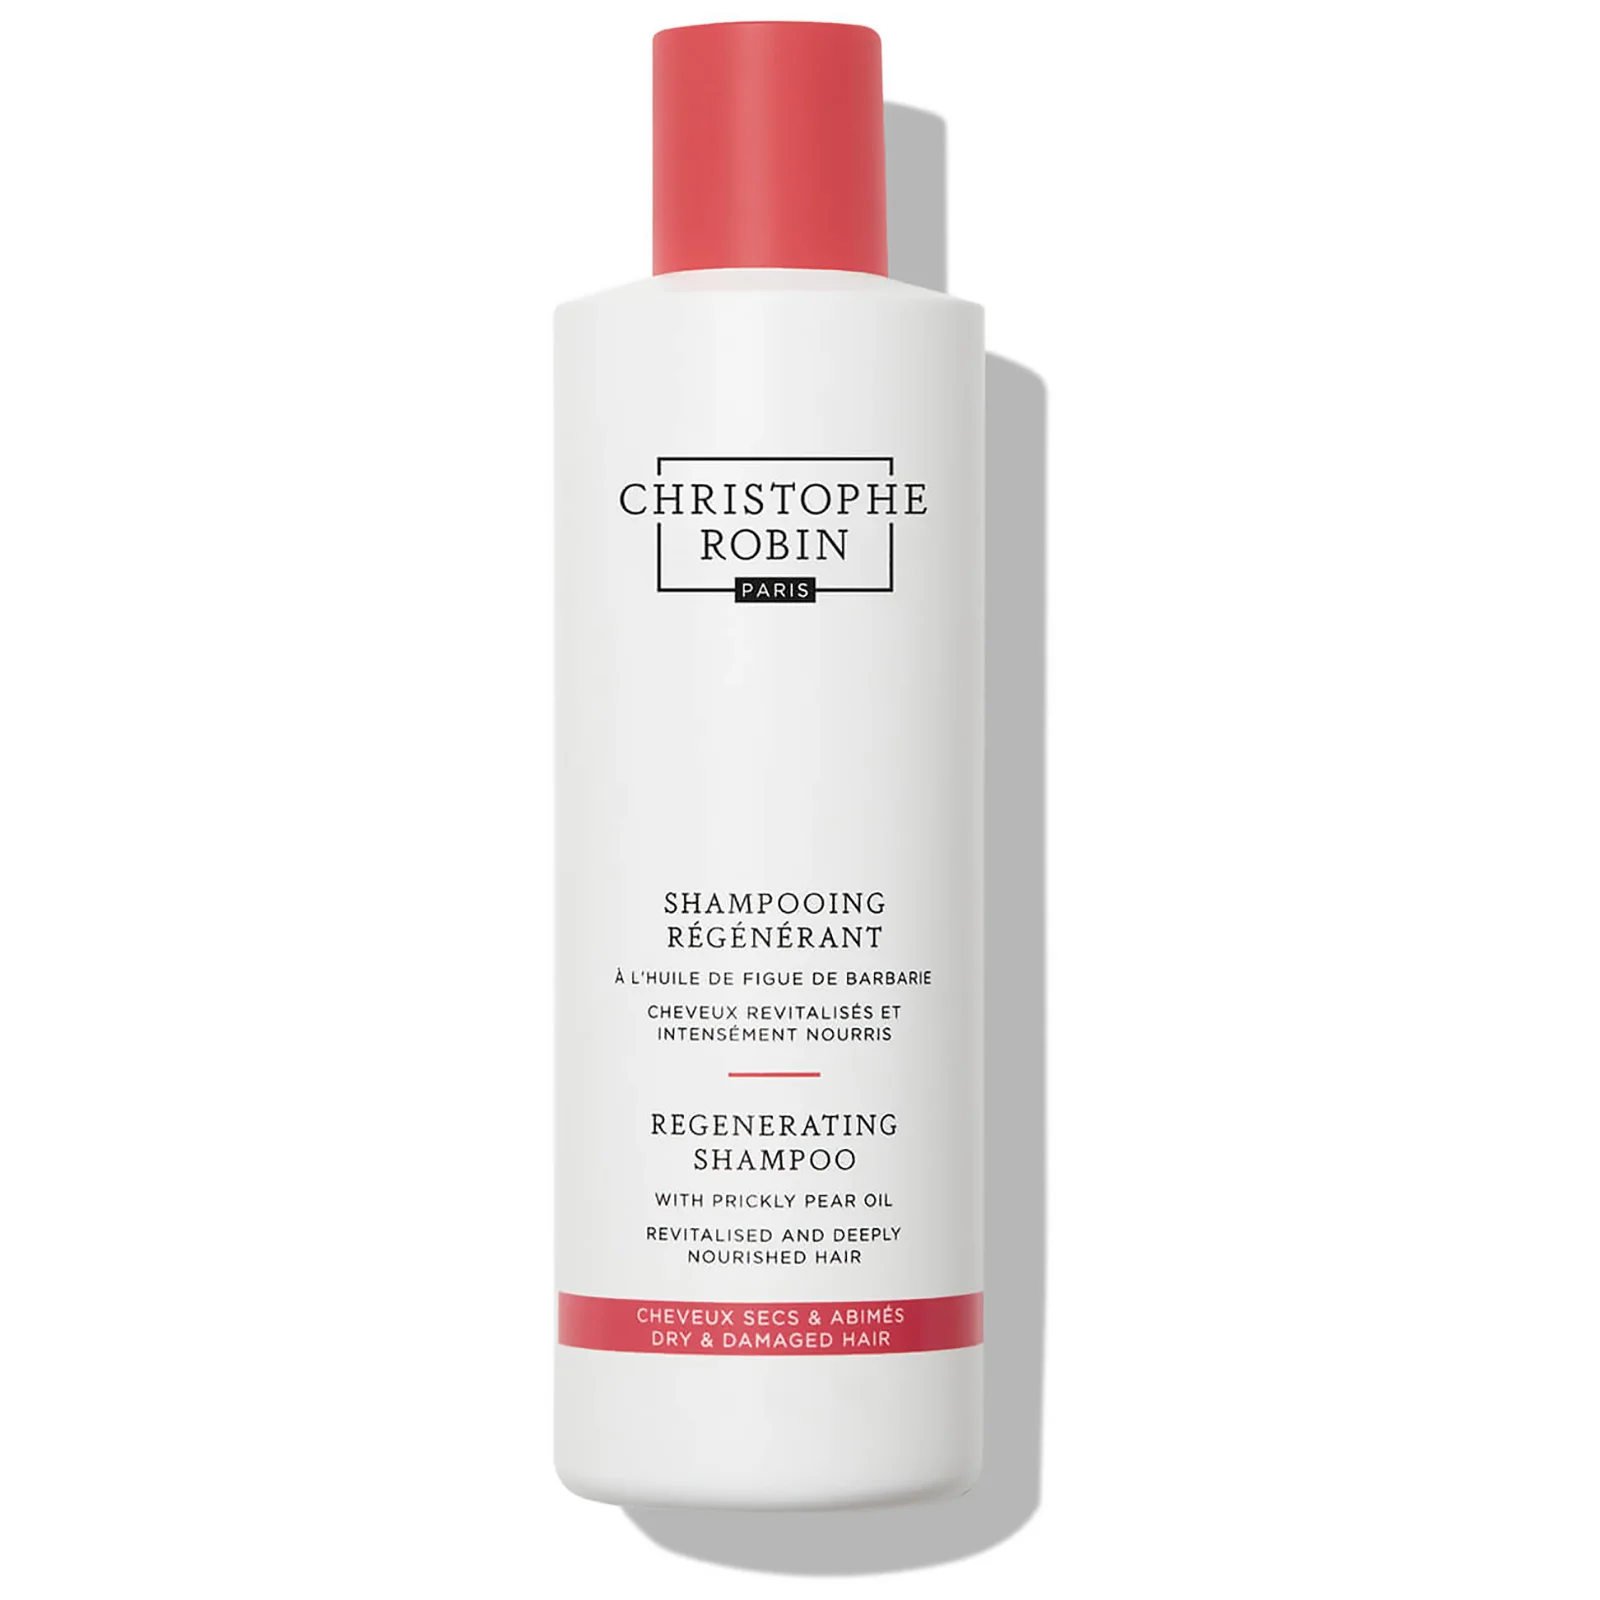 Christophe Robin Regenerating Shampoo with Prickly Pear Oil 250ml Image 1